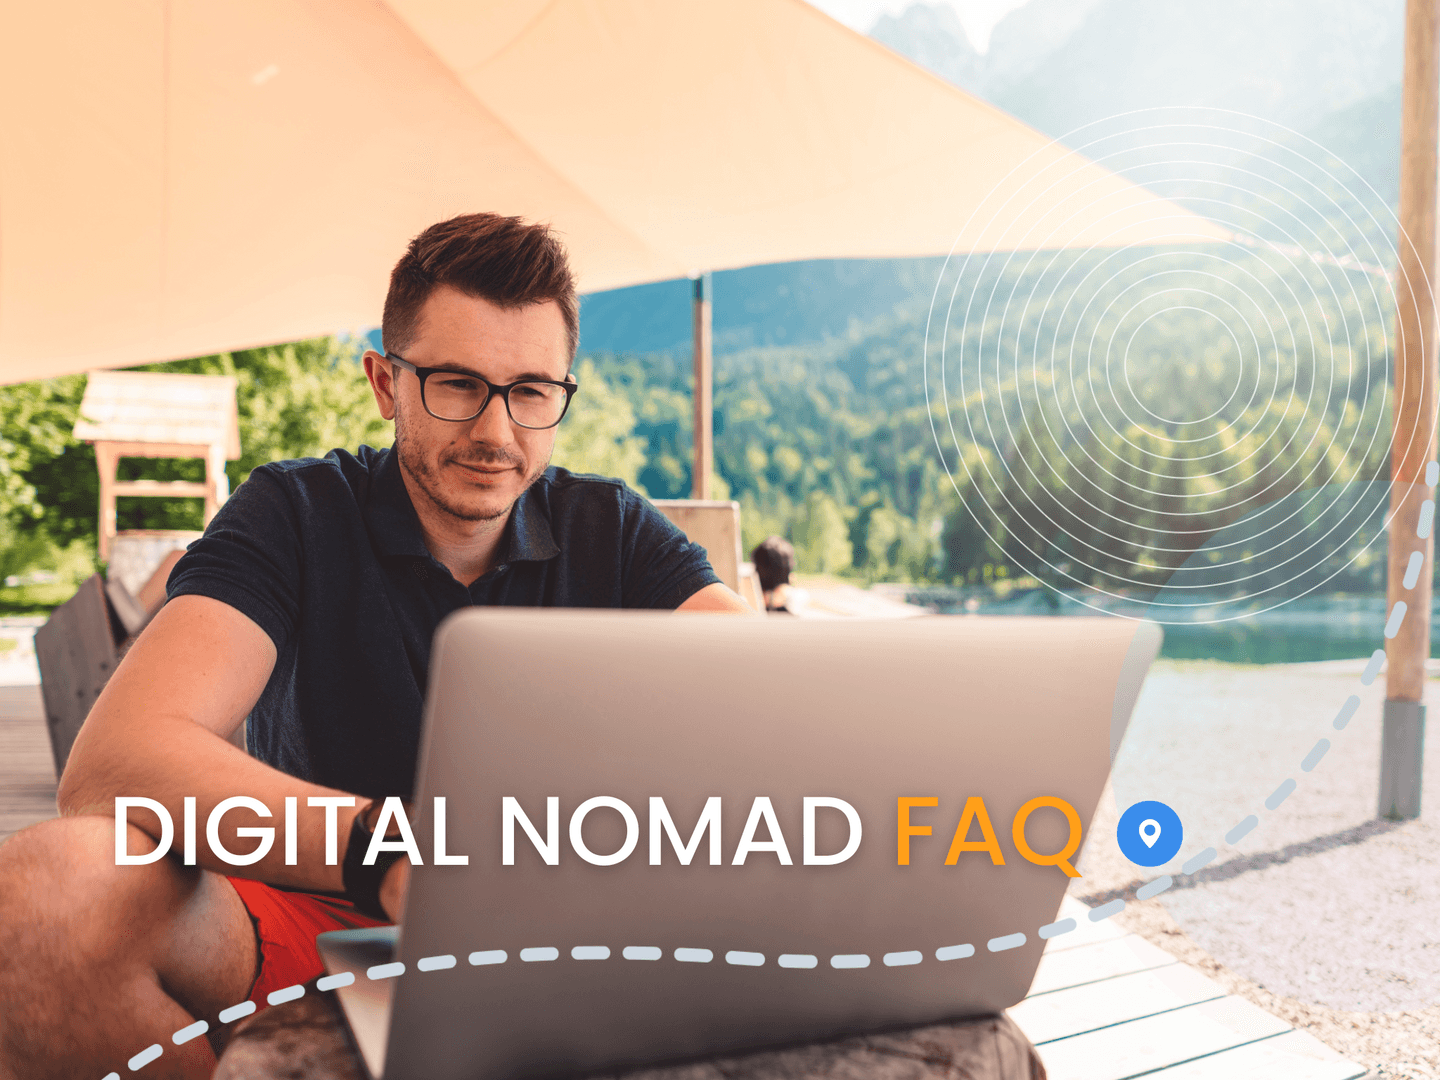 Frequently Asked Questions About Digital Nomads